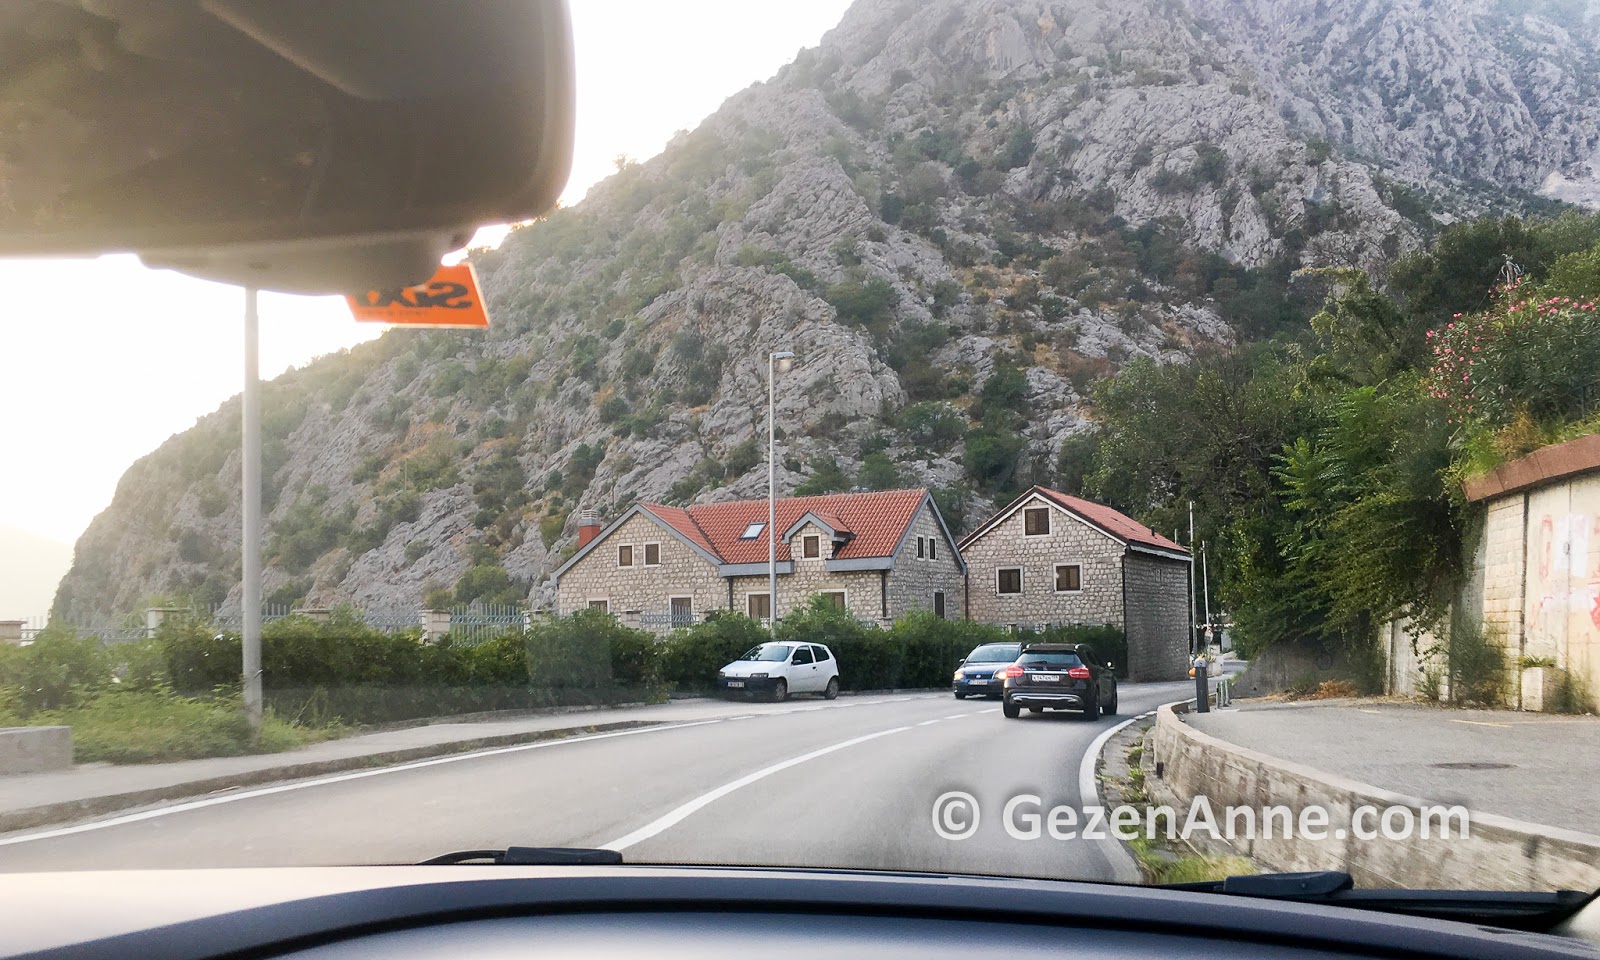 The roads in Montenegro on our Kotor to Mostar trip.